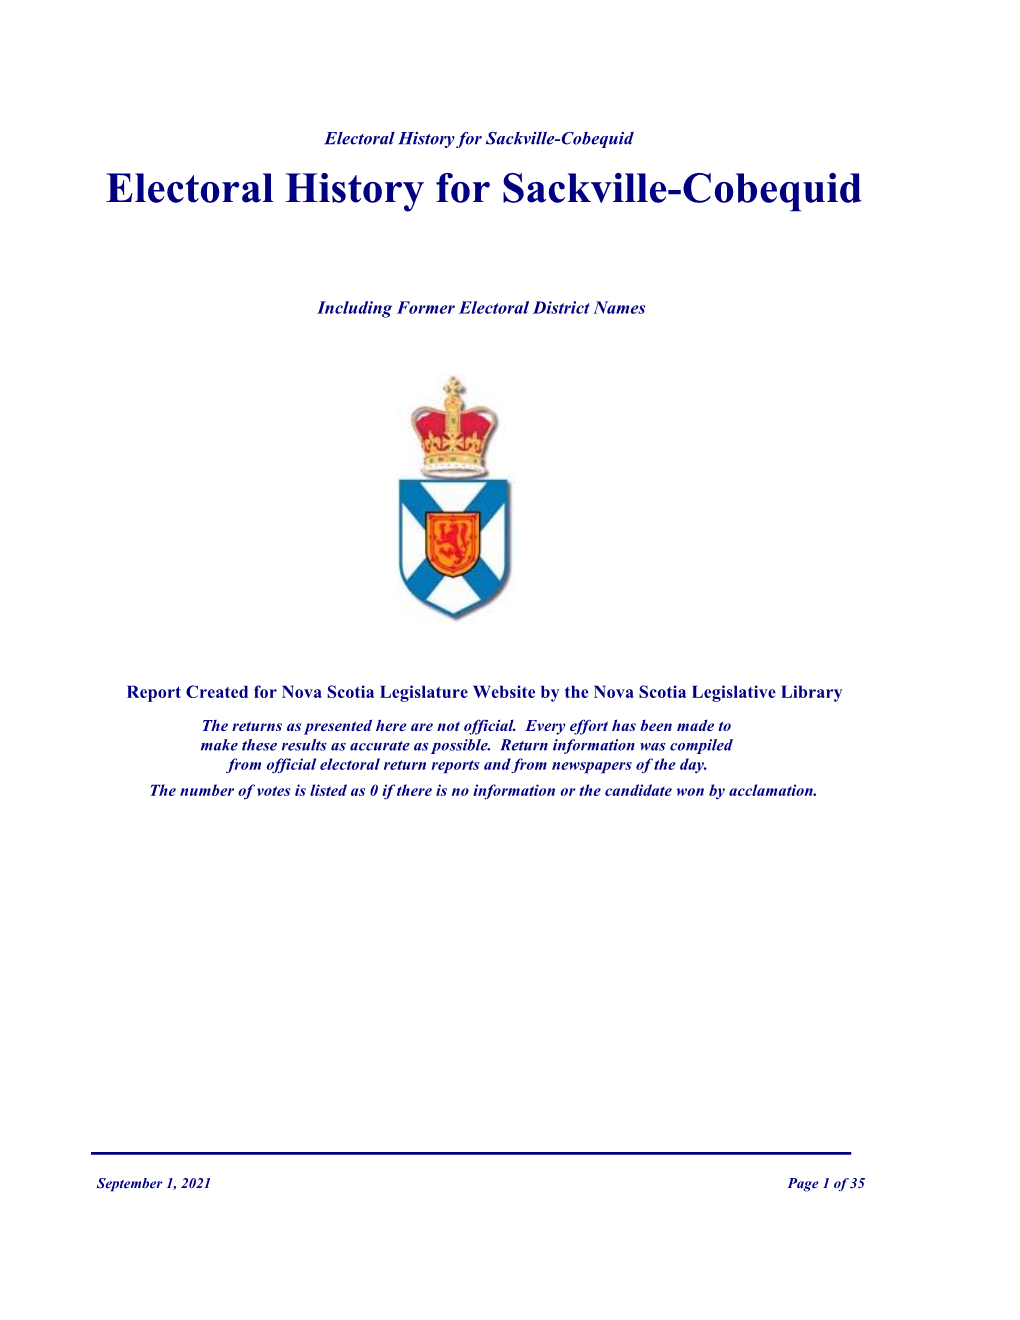 Electoral History for Sackville-Cobequid Electoral History for Sackville-Cobequid